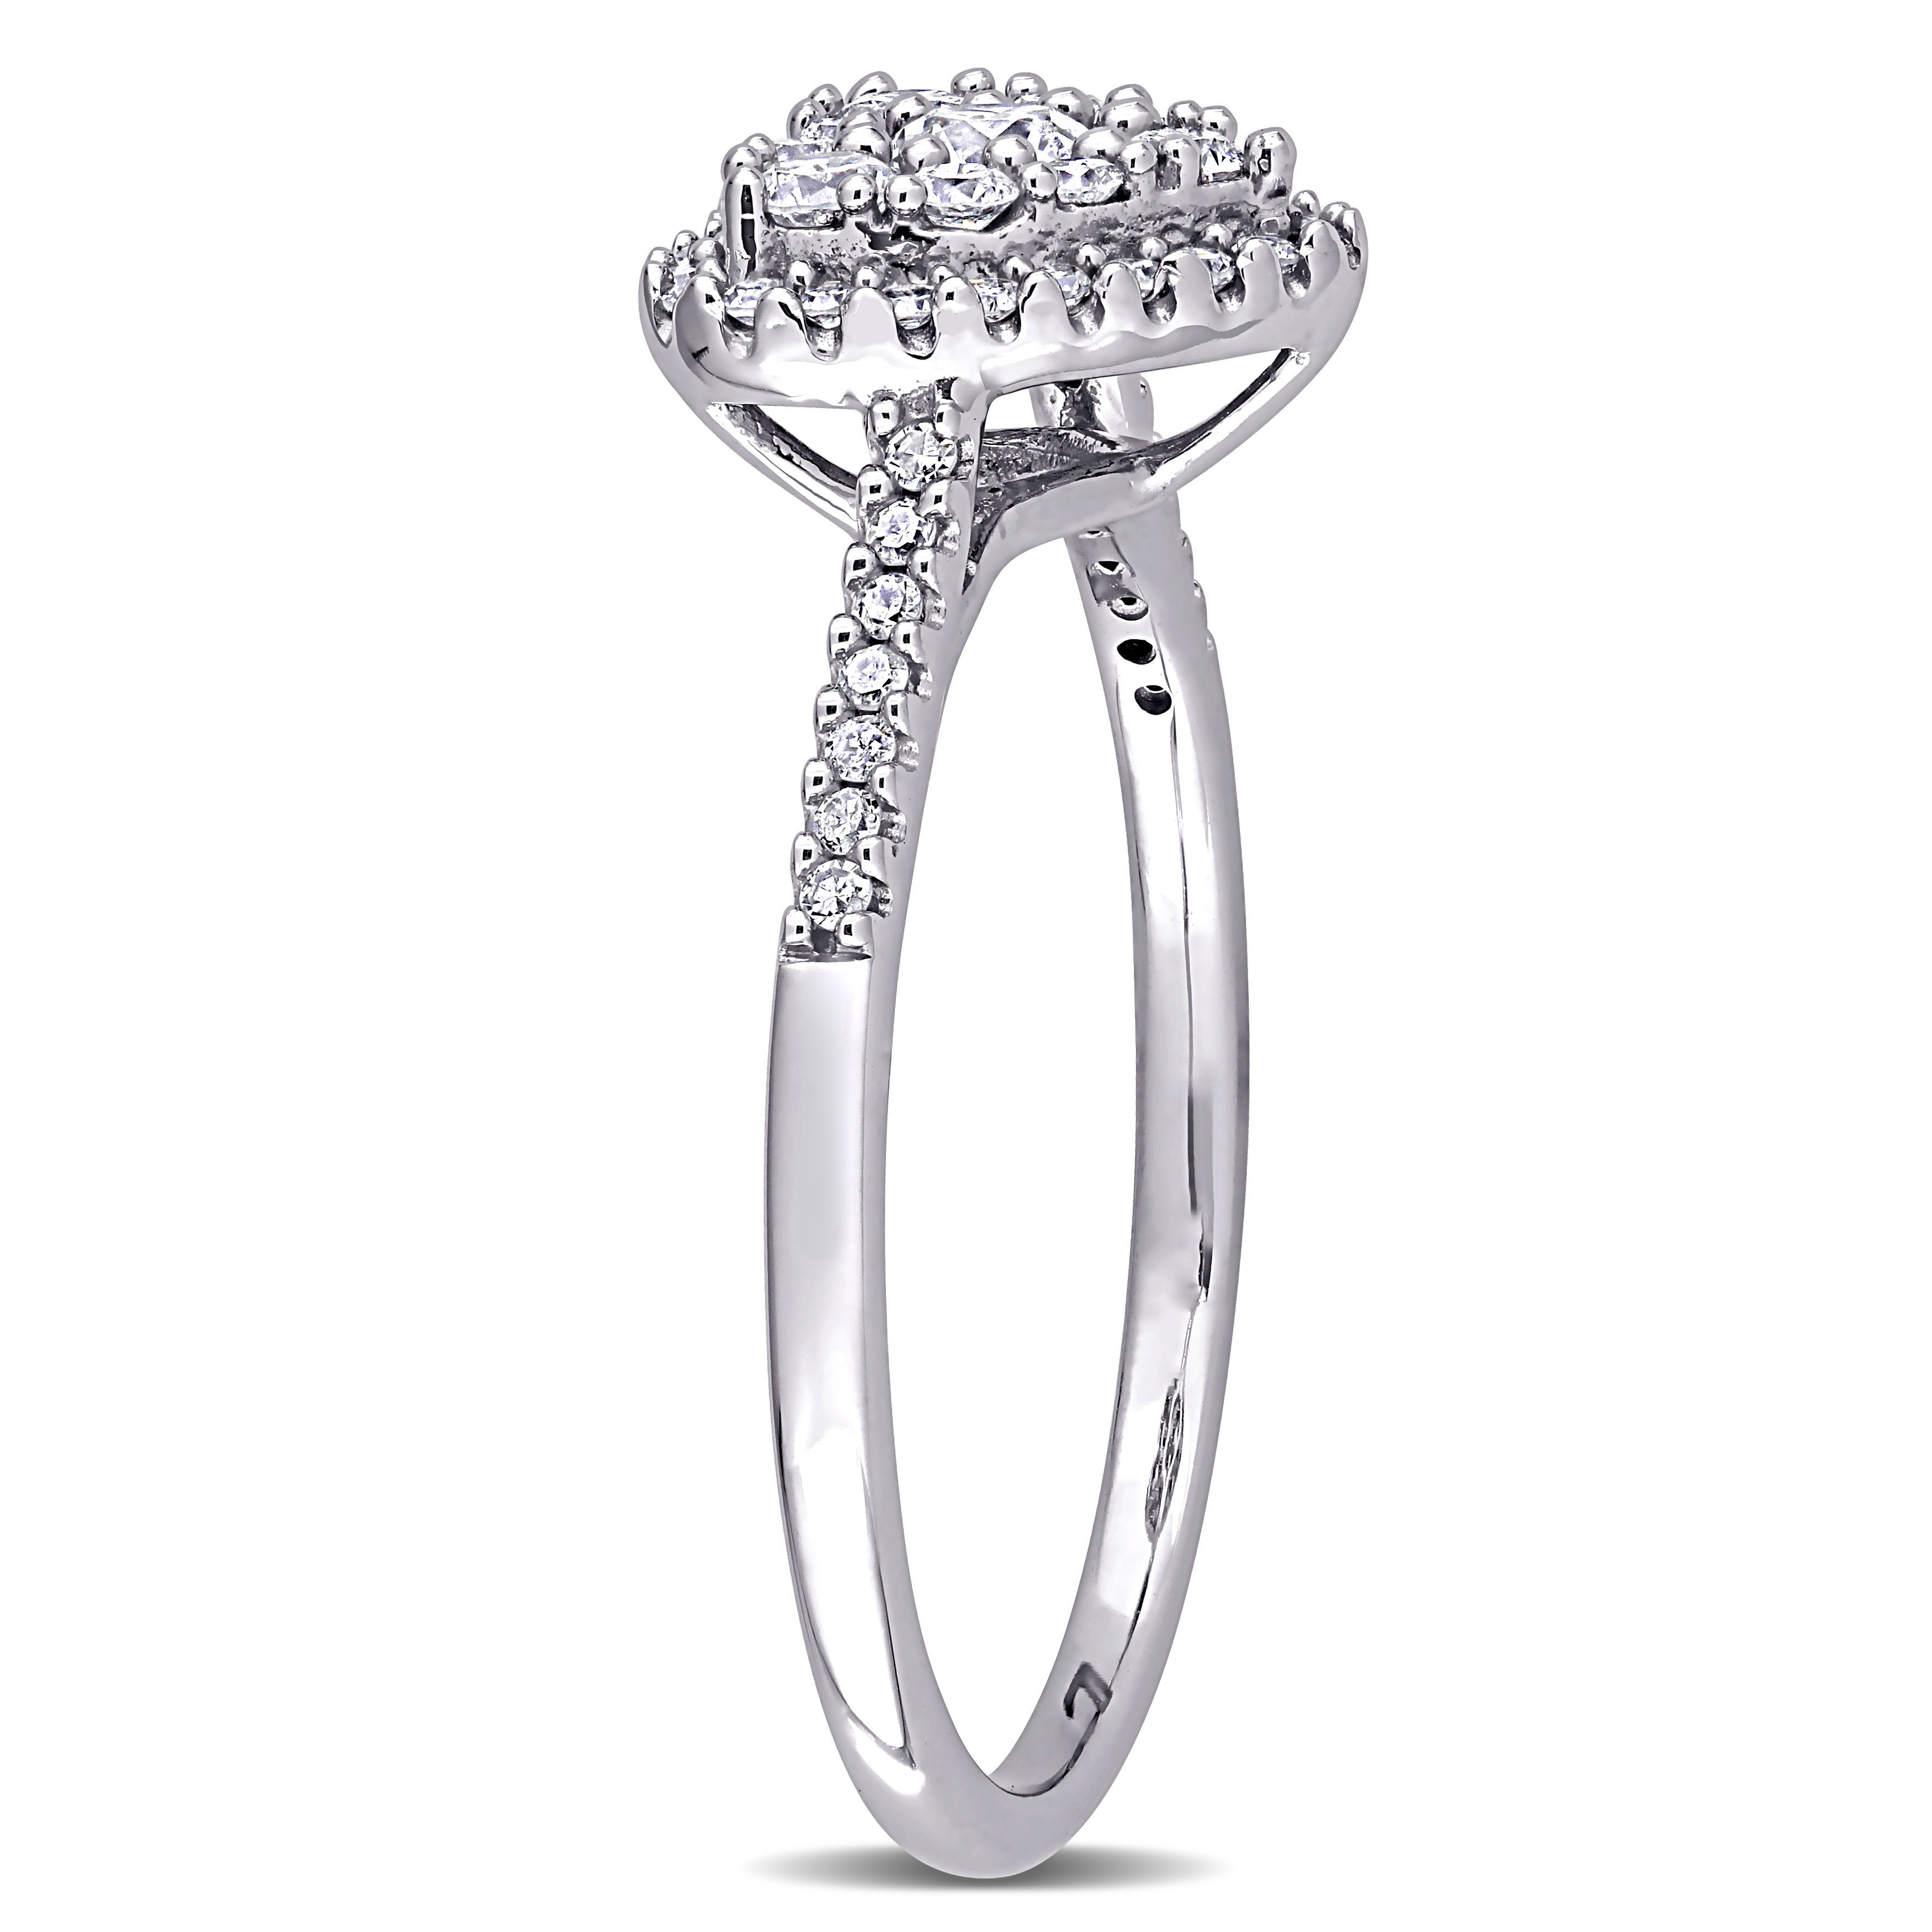 1/2 CT TW Diamond Composite Heart Shape Halo Engagement Ring in 10k White Gold